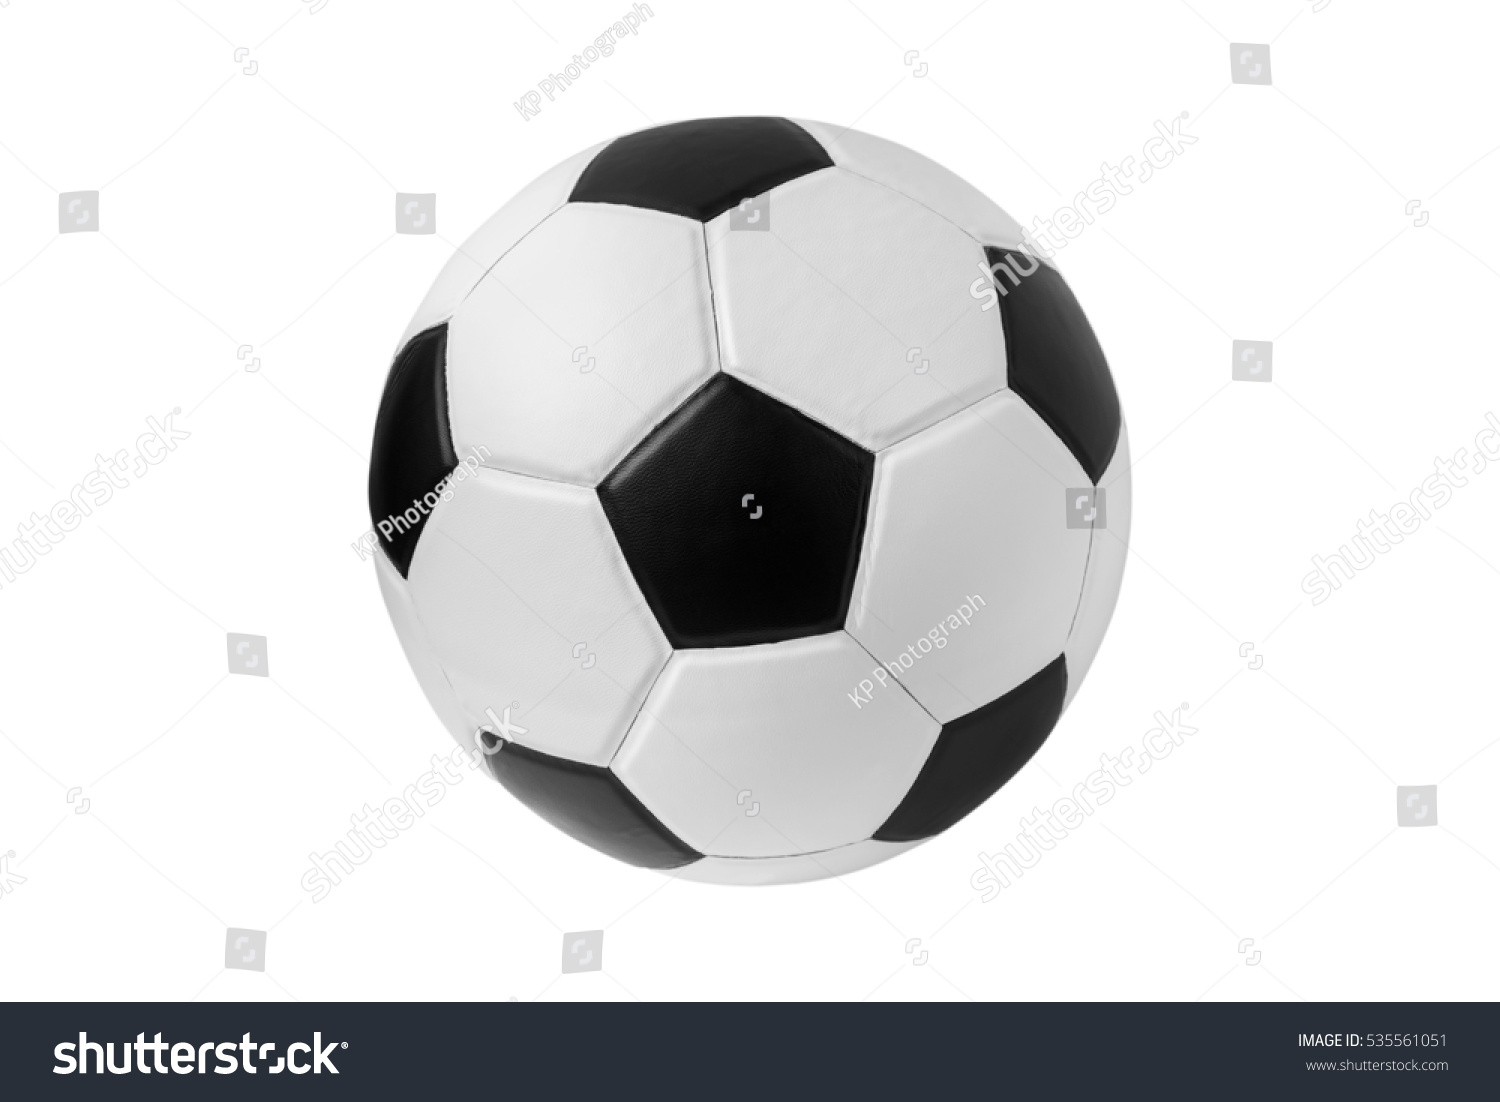  soccer ball on isolated.  #535561051